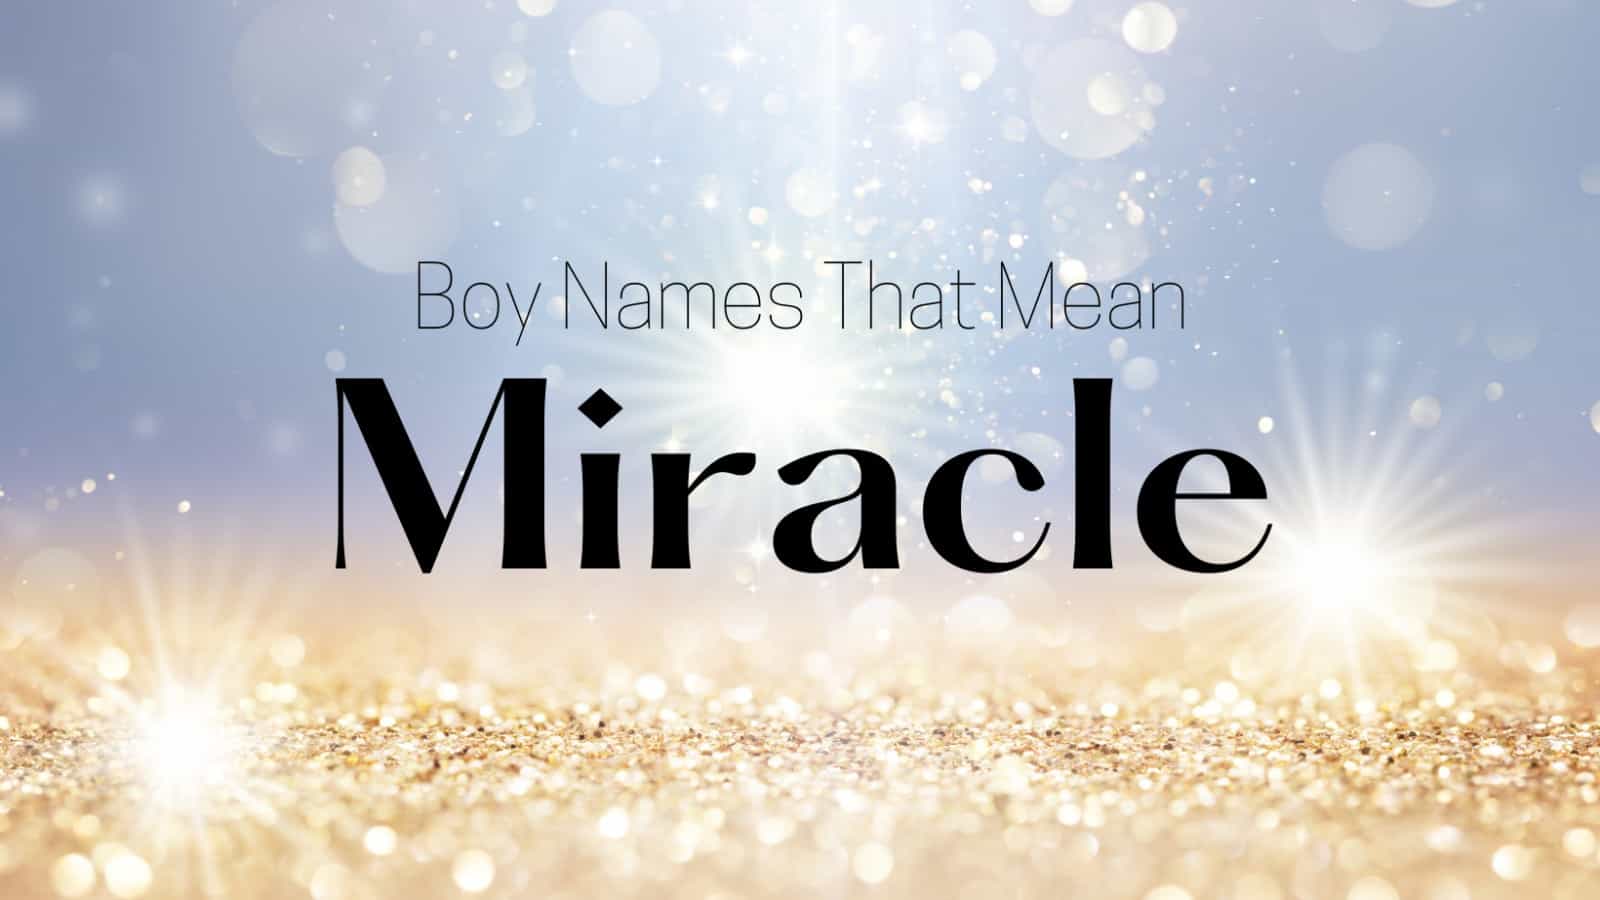 Boy Names That Mean Miracle